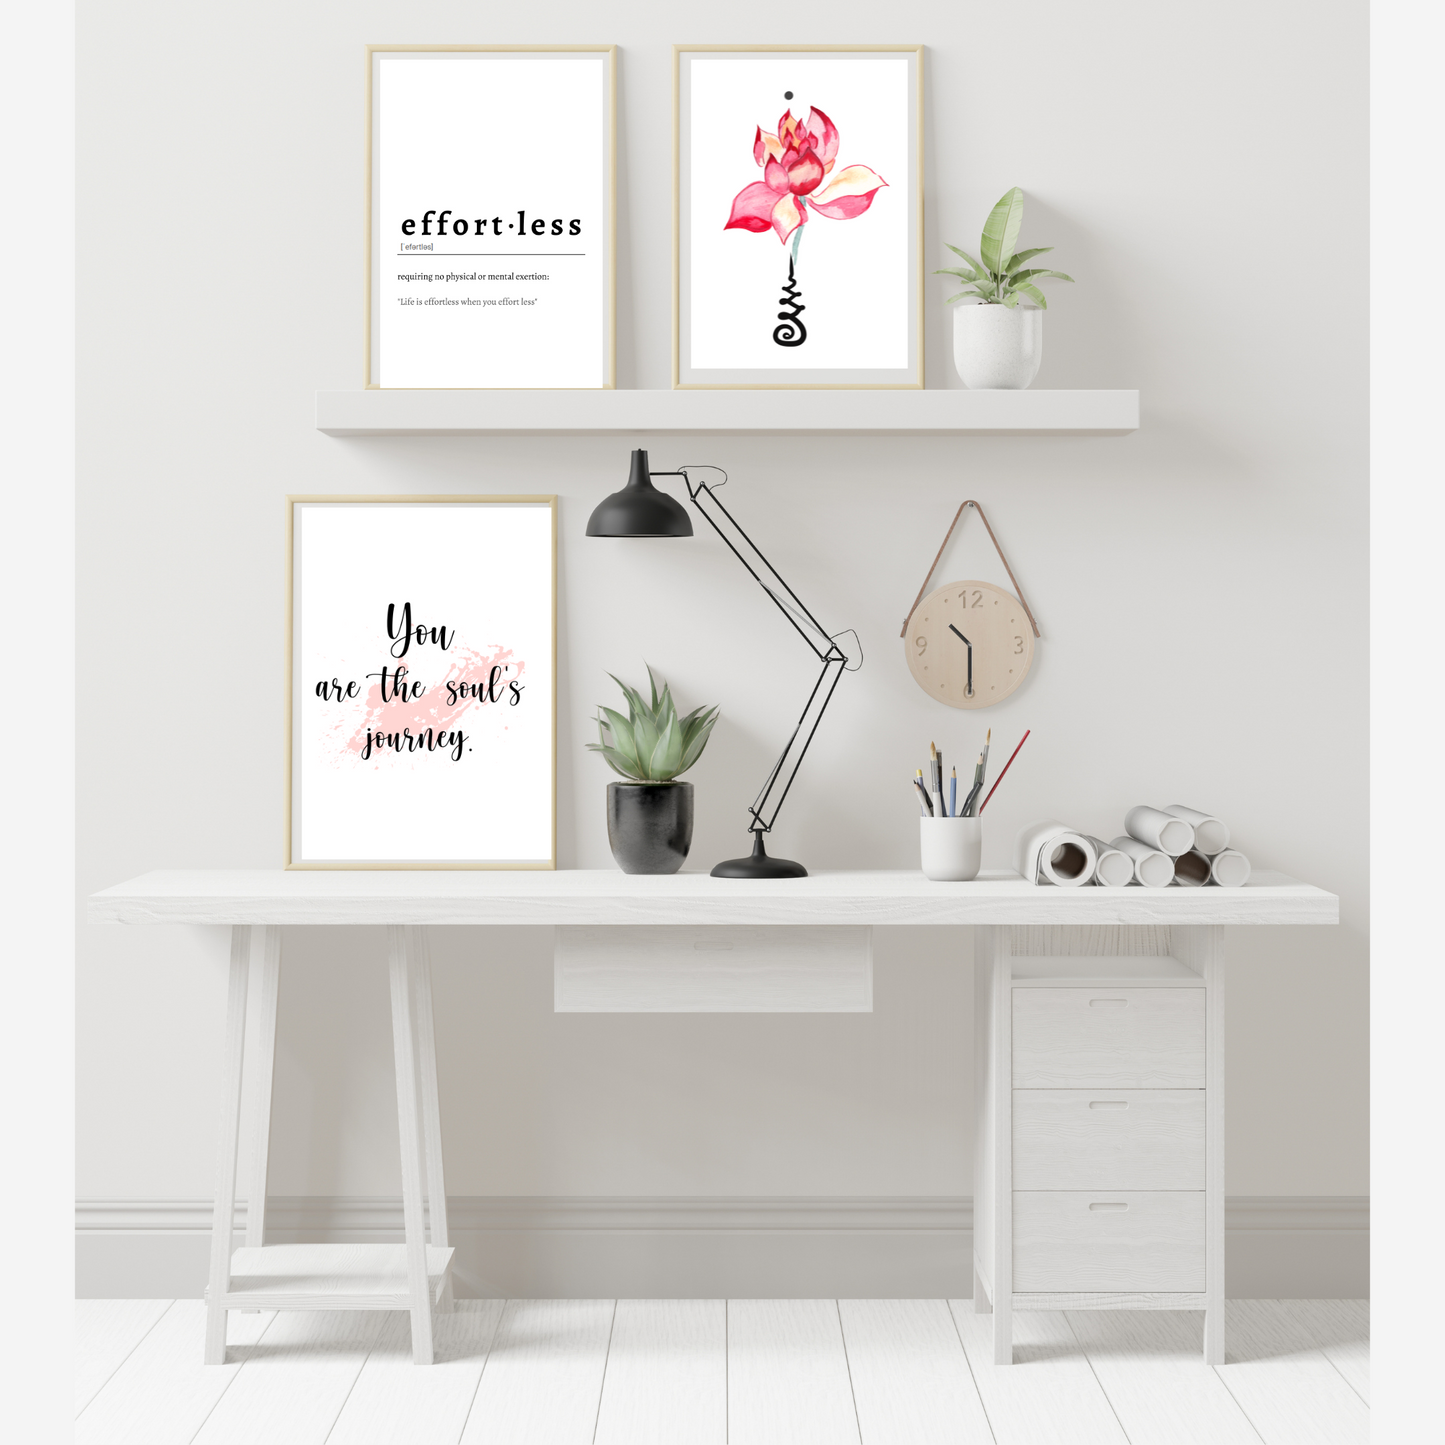 Inspirational Wall Art, Digital Download Prints, Floral Positive Quotes, Law of Attraction Home Decor